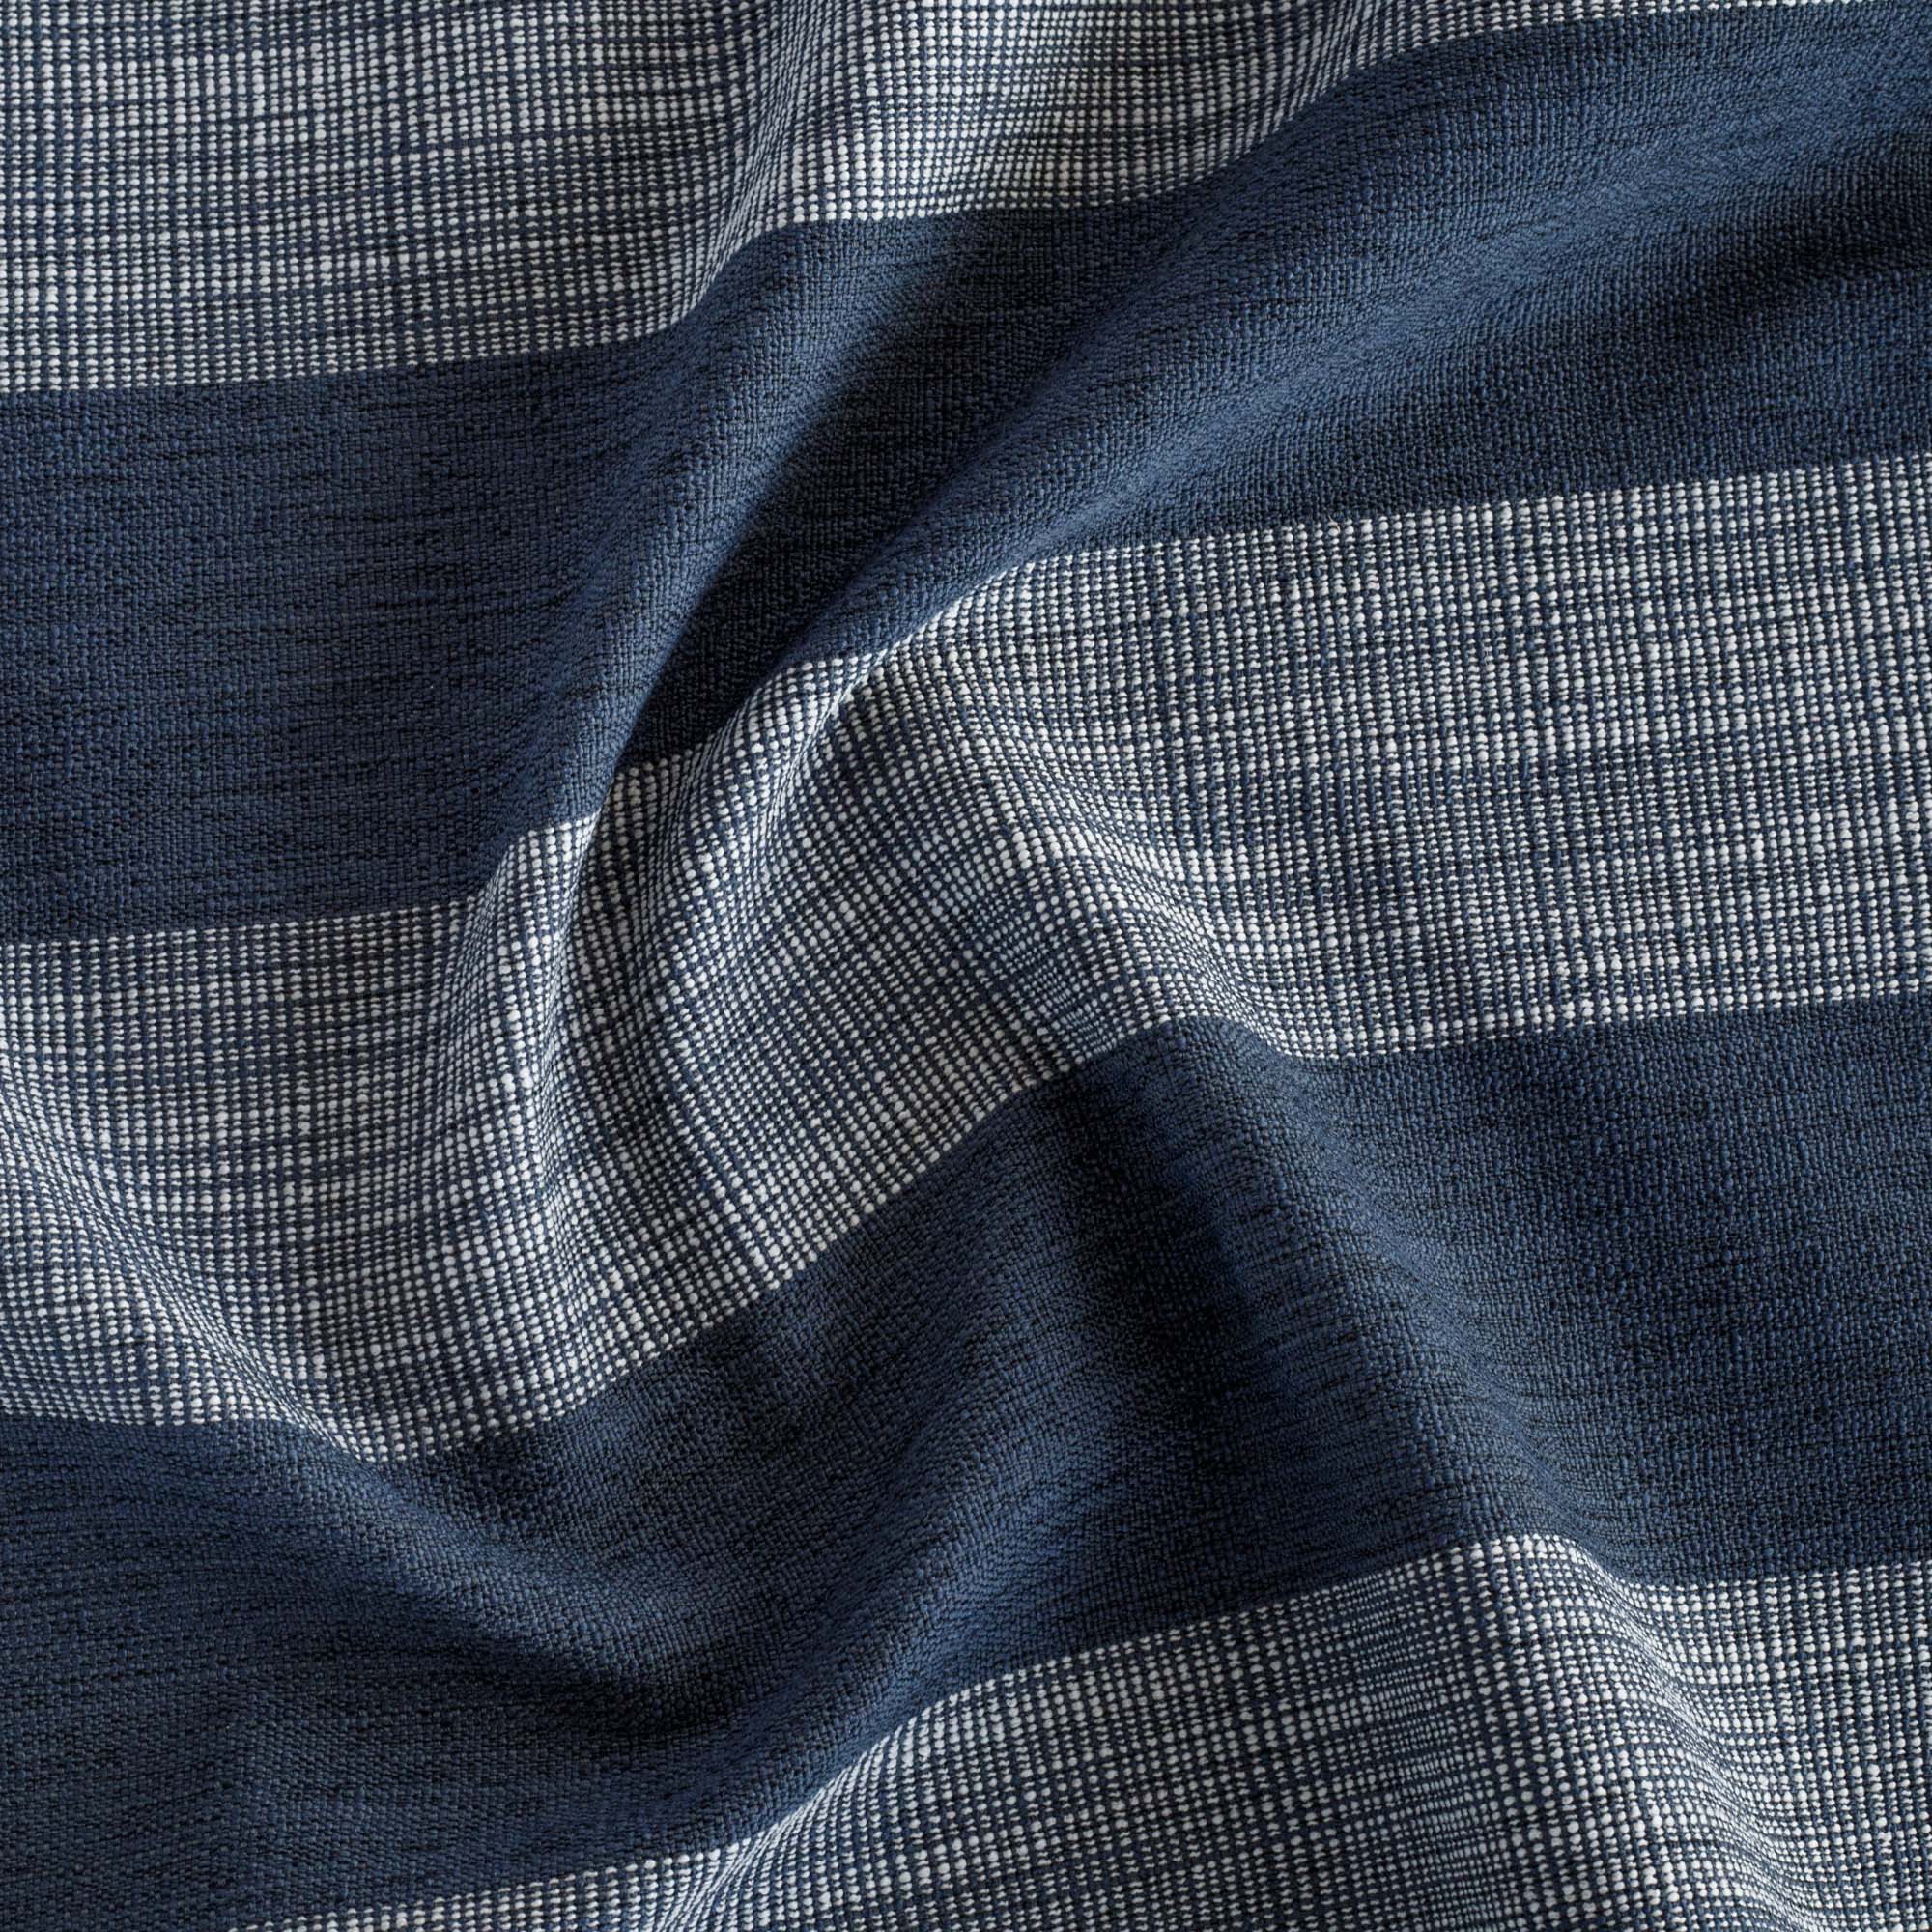 Marlow Fabric Indigo, a deep navy blue and white wide striped multi use fabric from Tonic Living